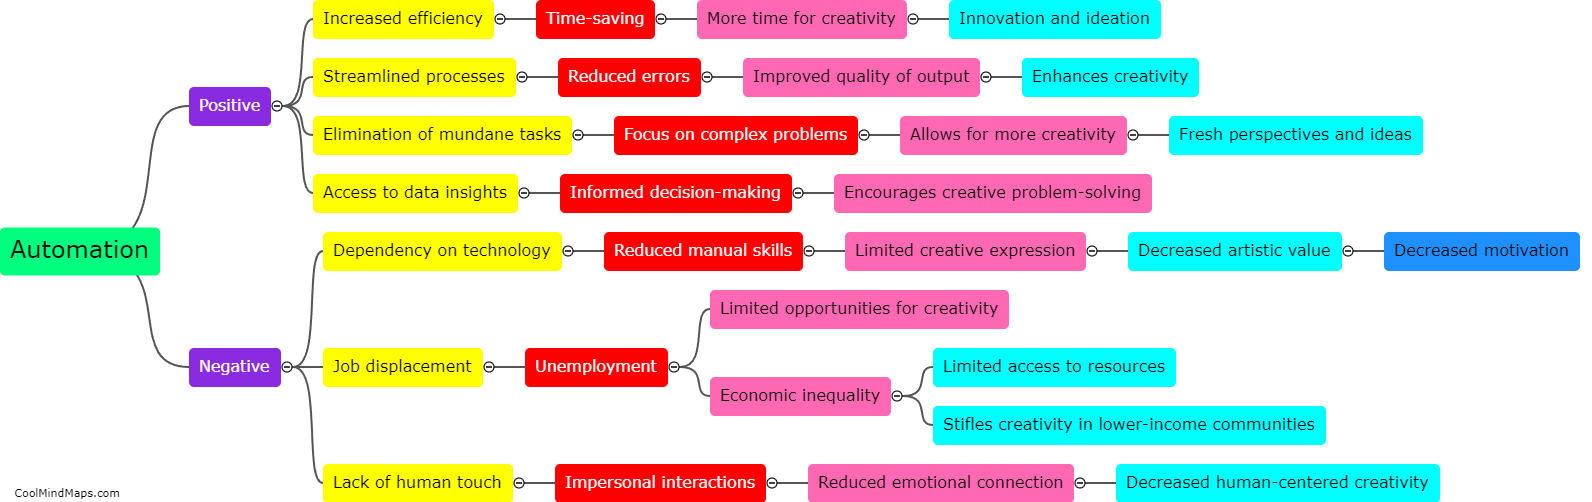 What are the positive and negative impacts of automation of challenging tasks on creativity?